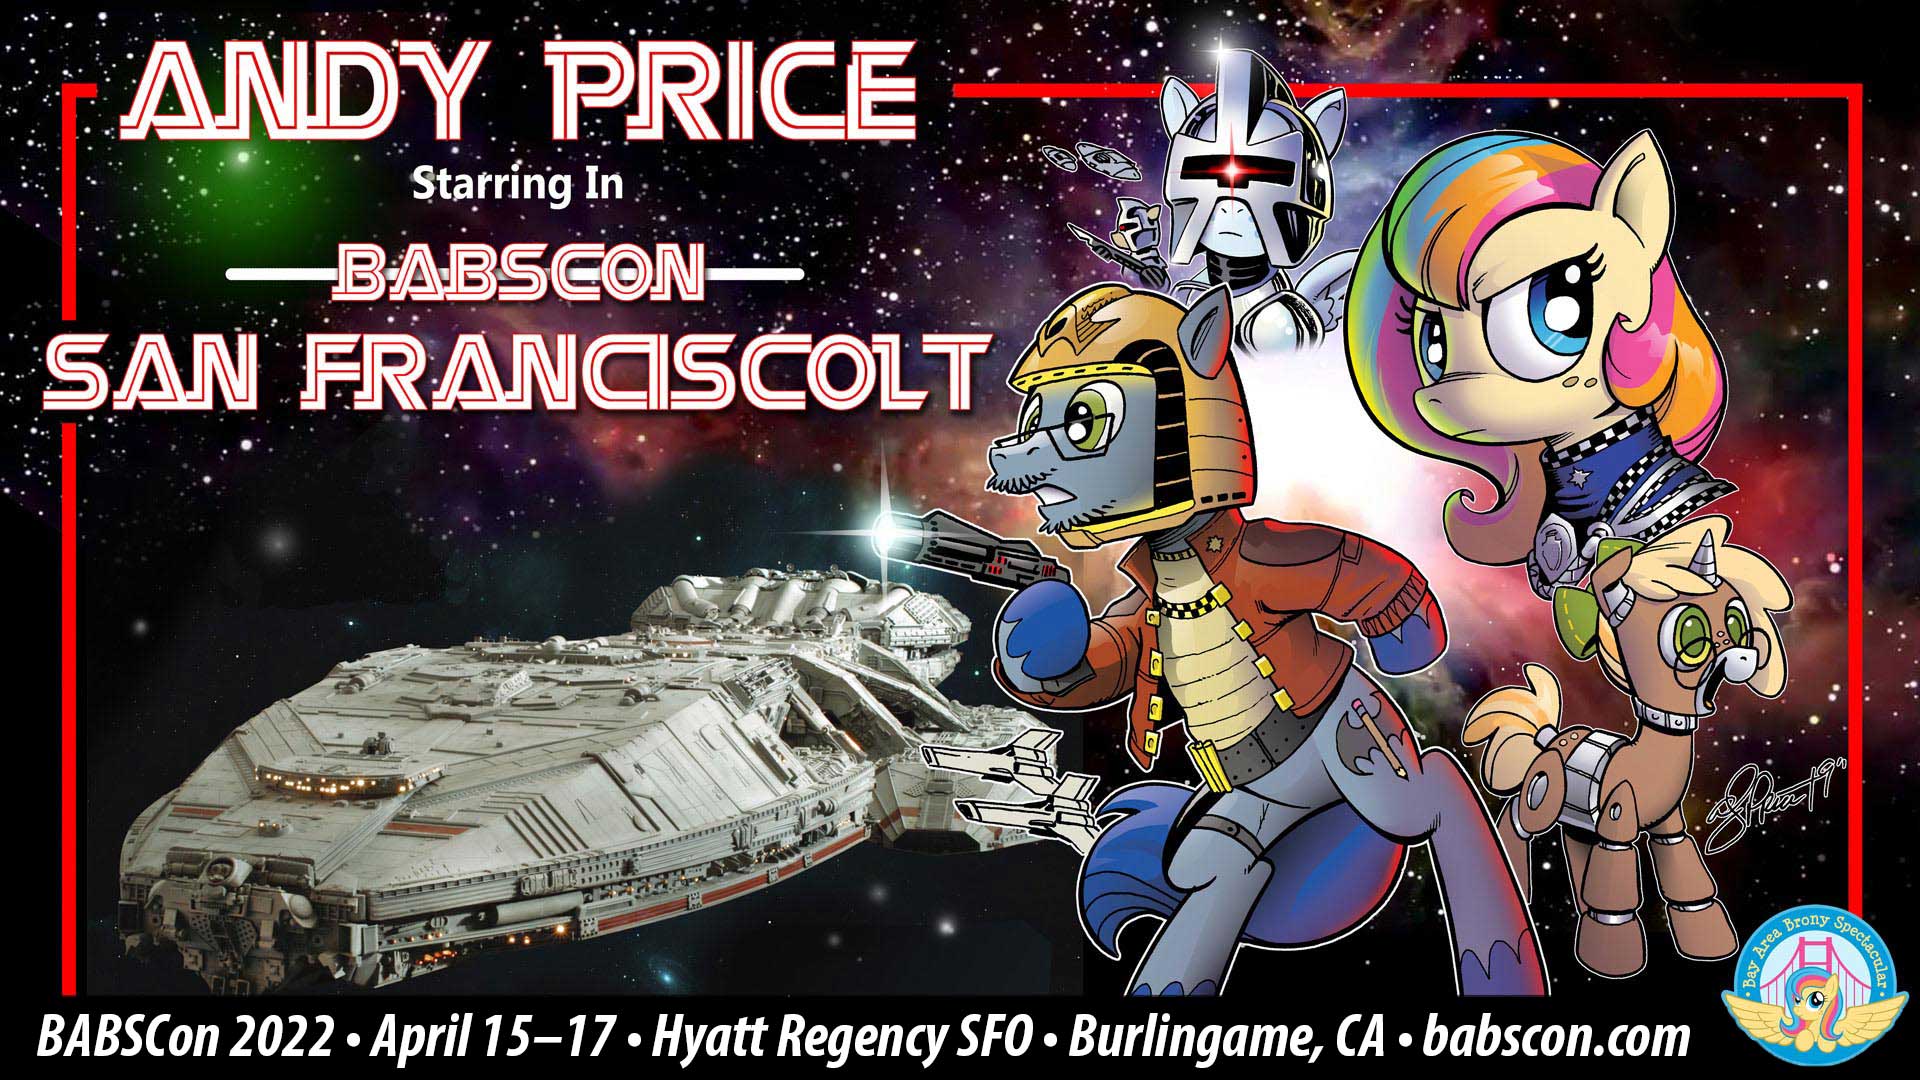 BABSCon 2022 Gets Galactic with Andy Price